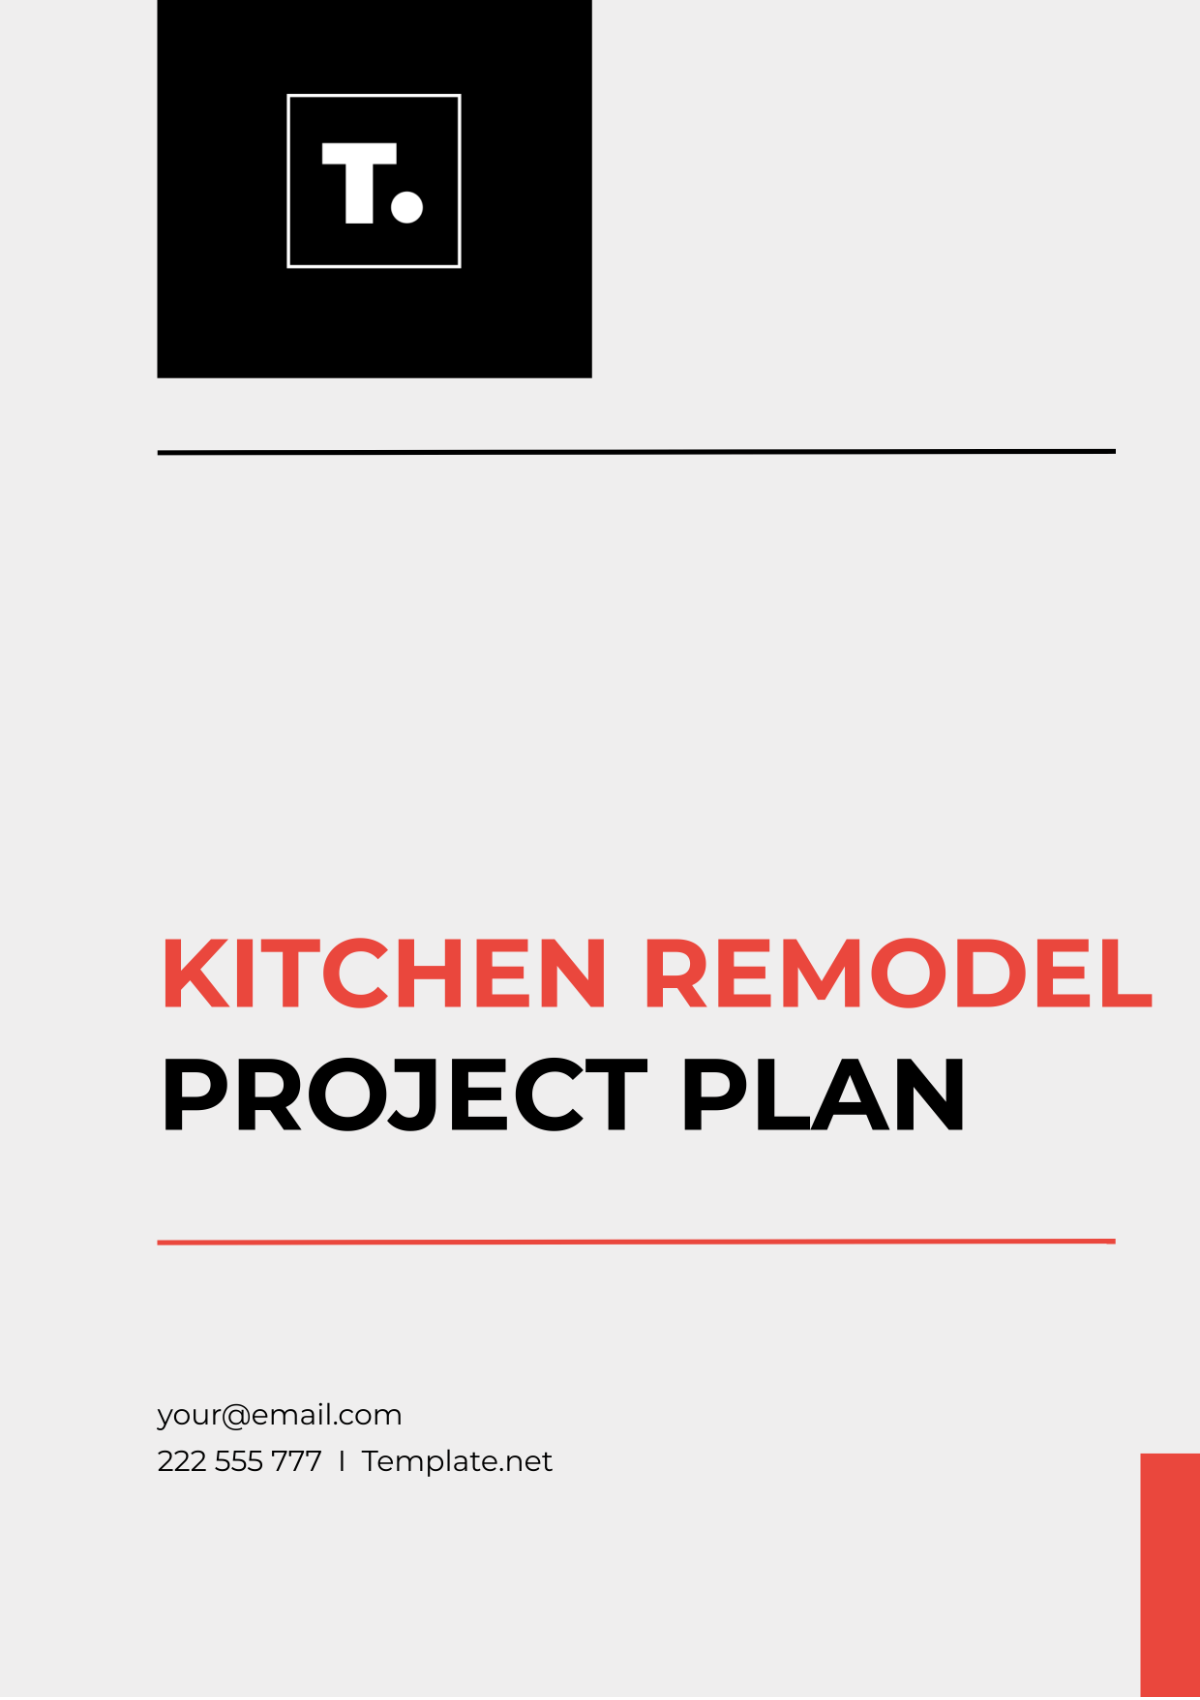 Kitchen Remodel Project Plan Template